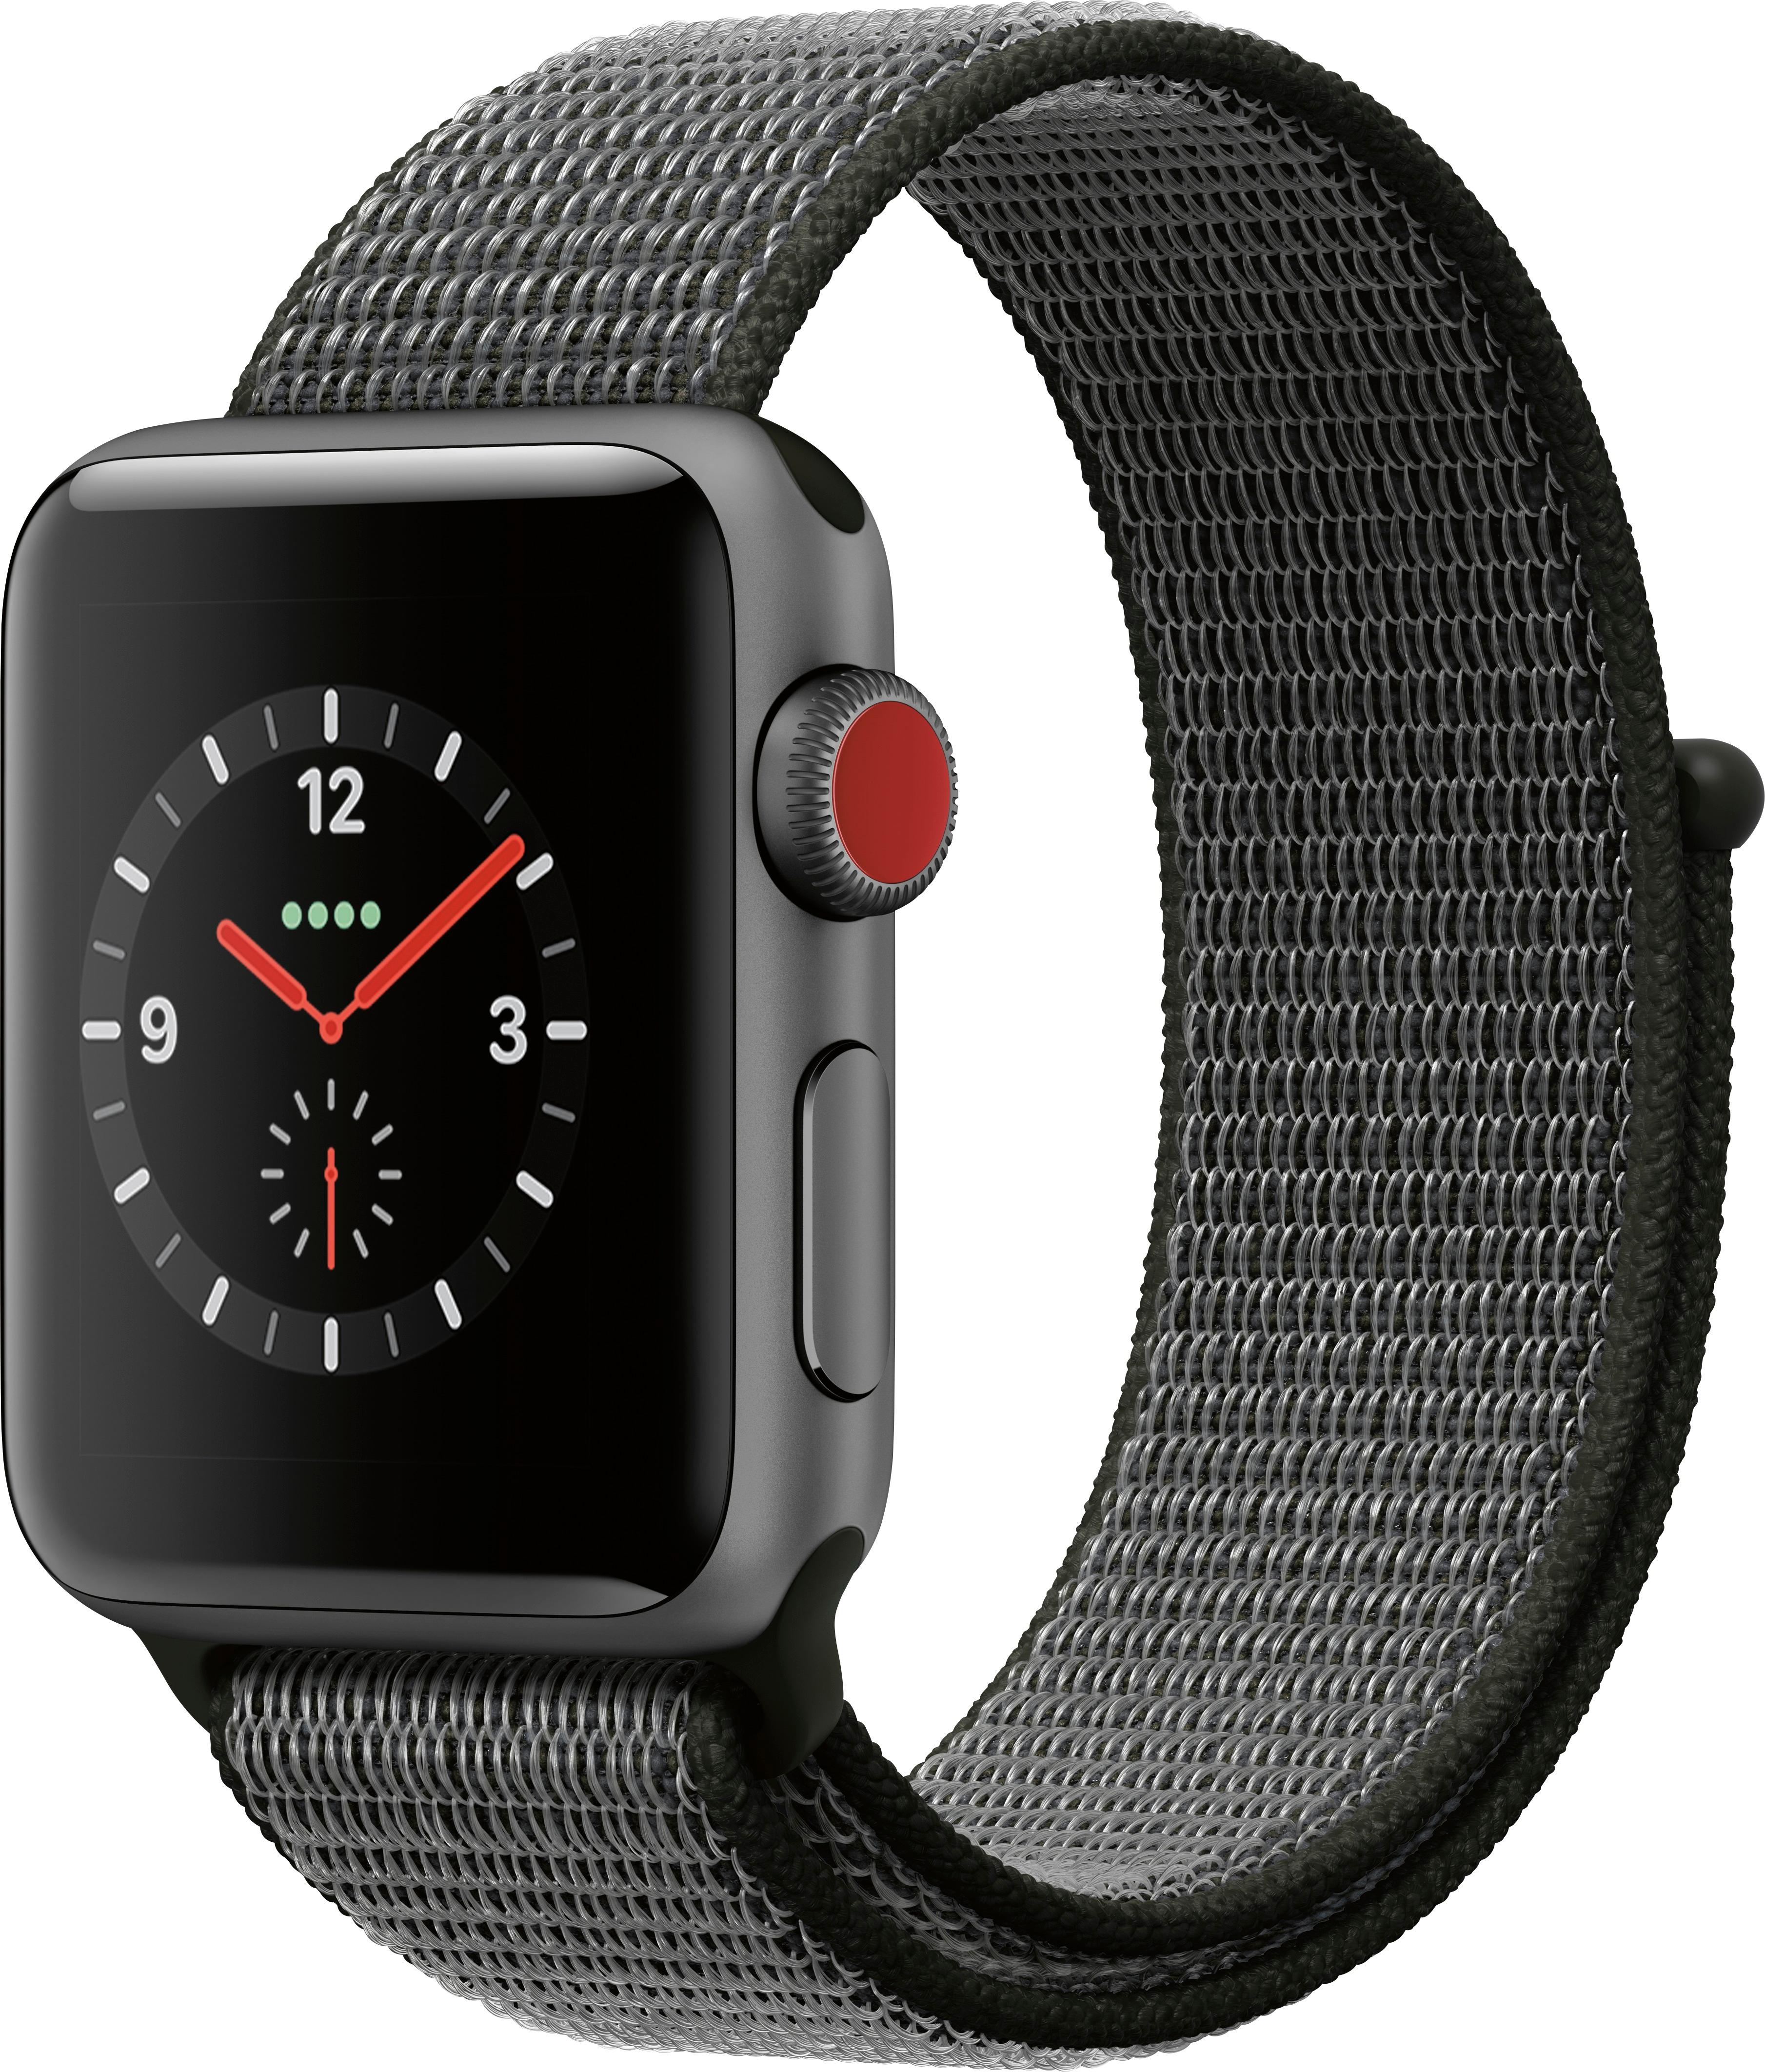 Angle View: Apple Watch Series 7 (GPS + Cellular) 41mm (PRODUCT)RED Aluminum Case with (PRODUCT)RED Sport Band - (PRODUCT)RED (AT&T)